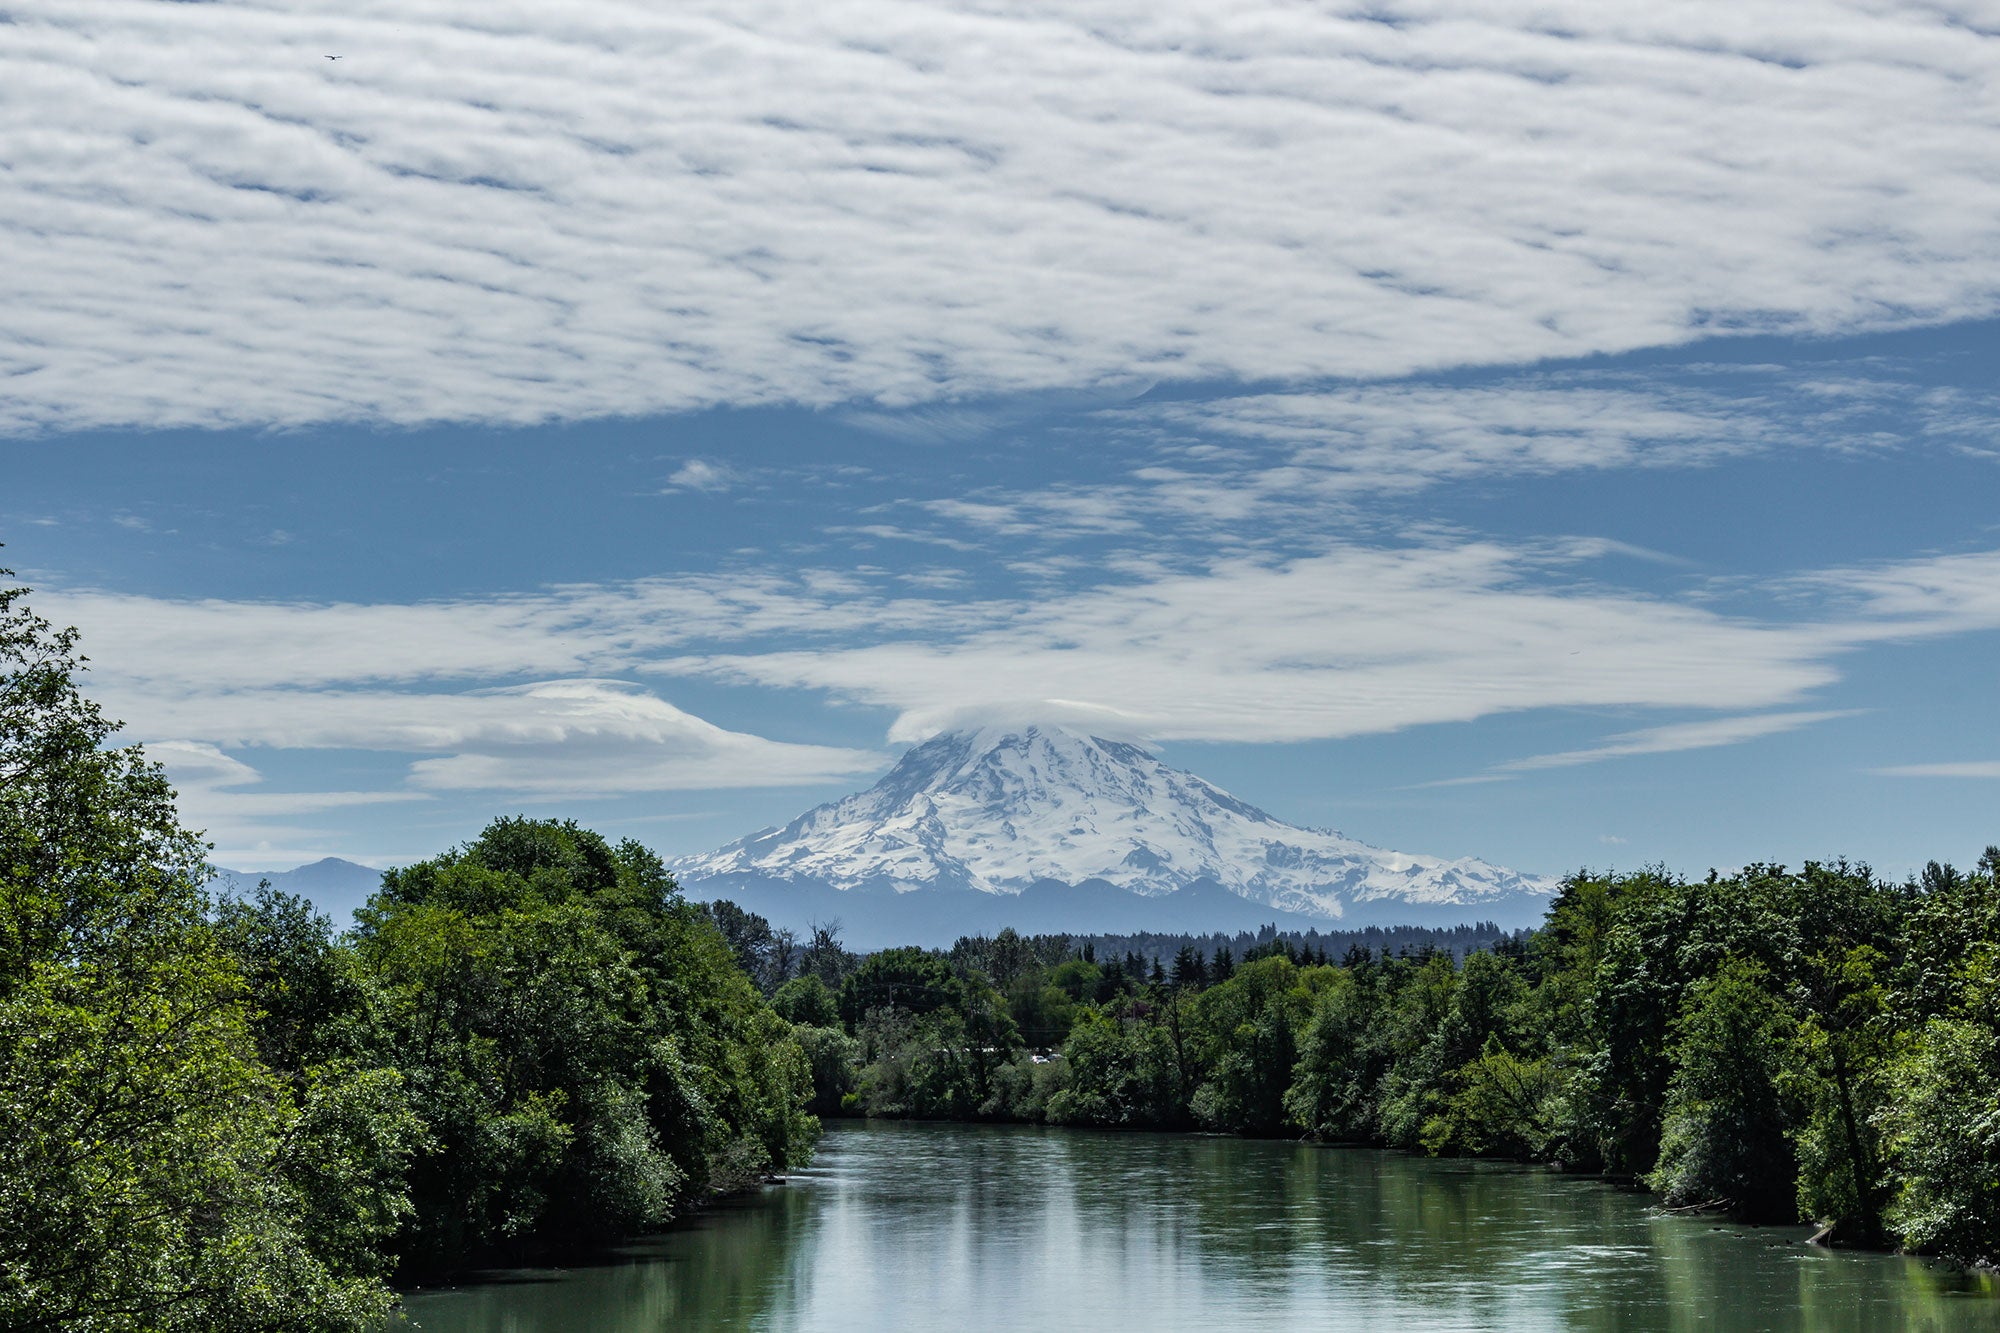 The Puyallup River, with Mount Rainier in the background.